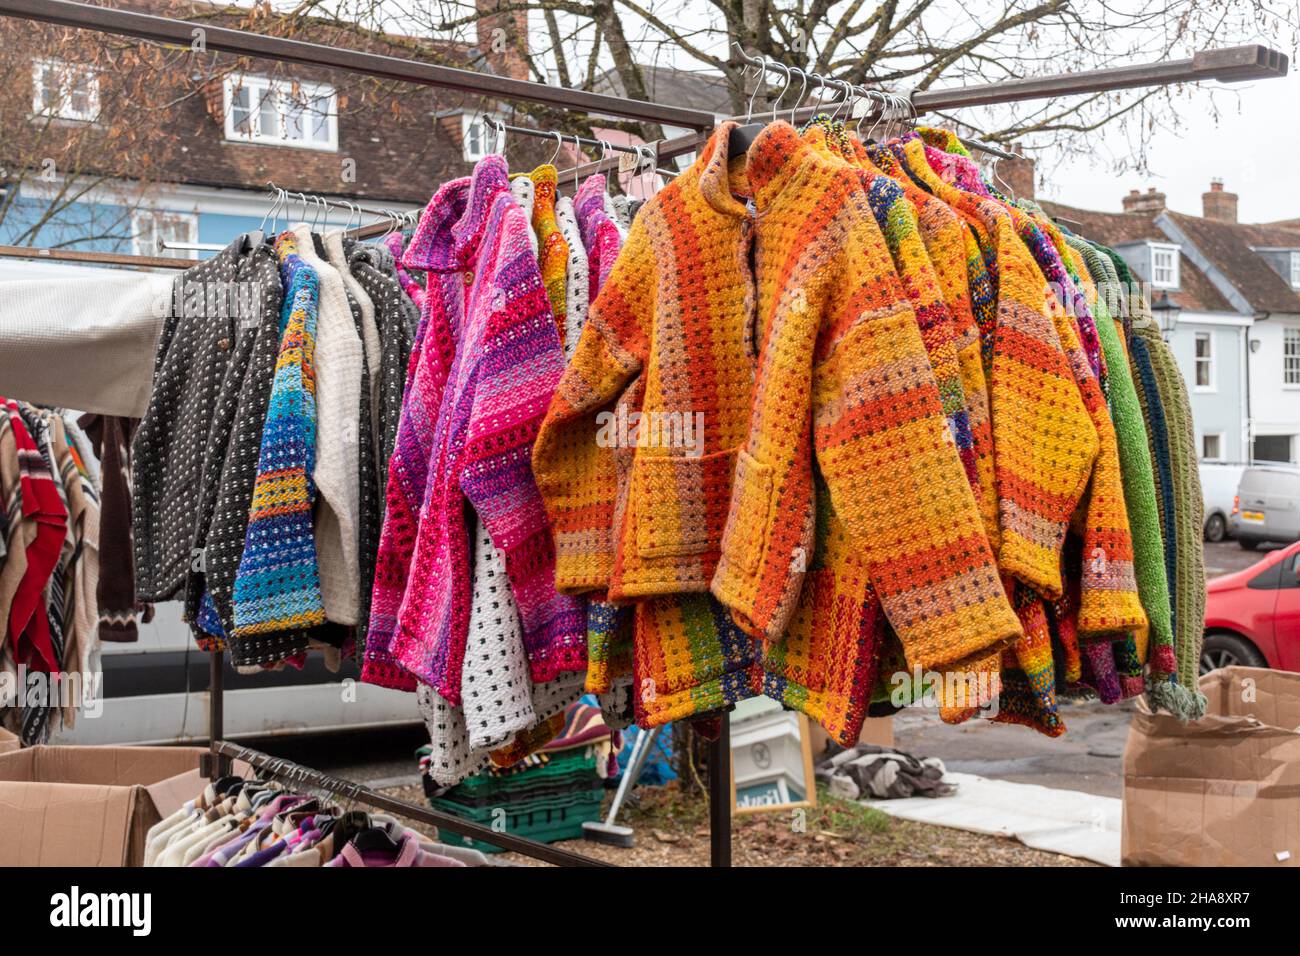 Market stall with brightly coloured woollen jackets, jumpers, cardigans, knitwear, UK Stock Photo